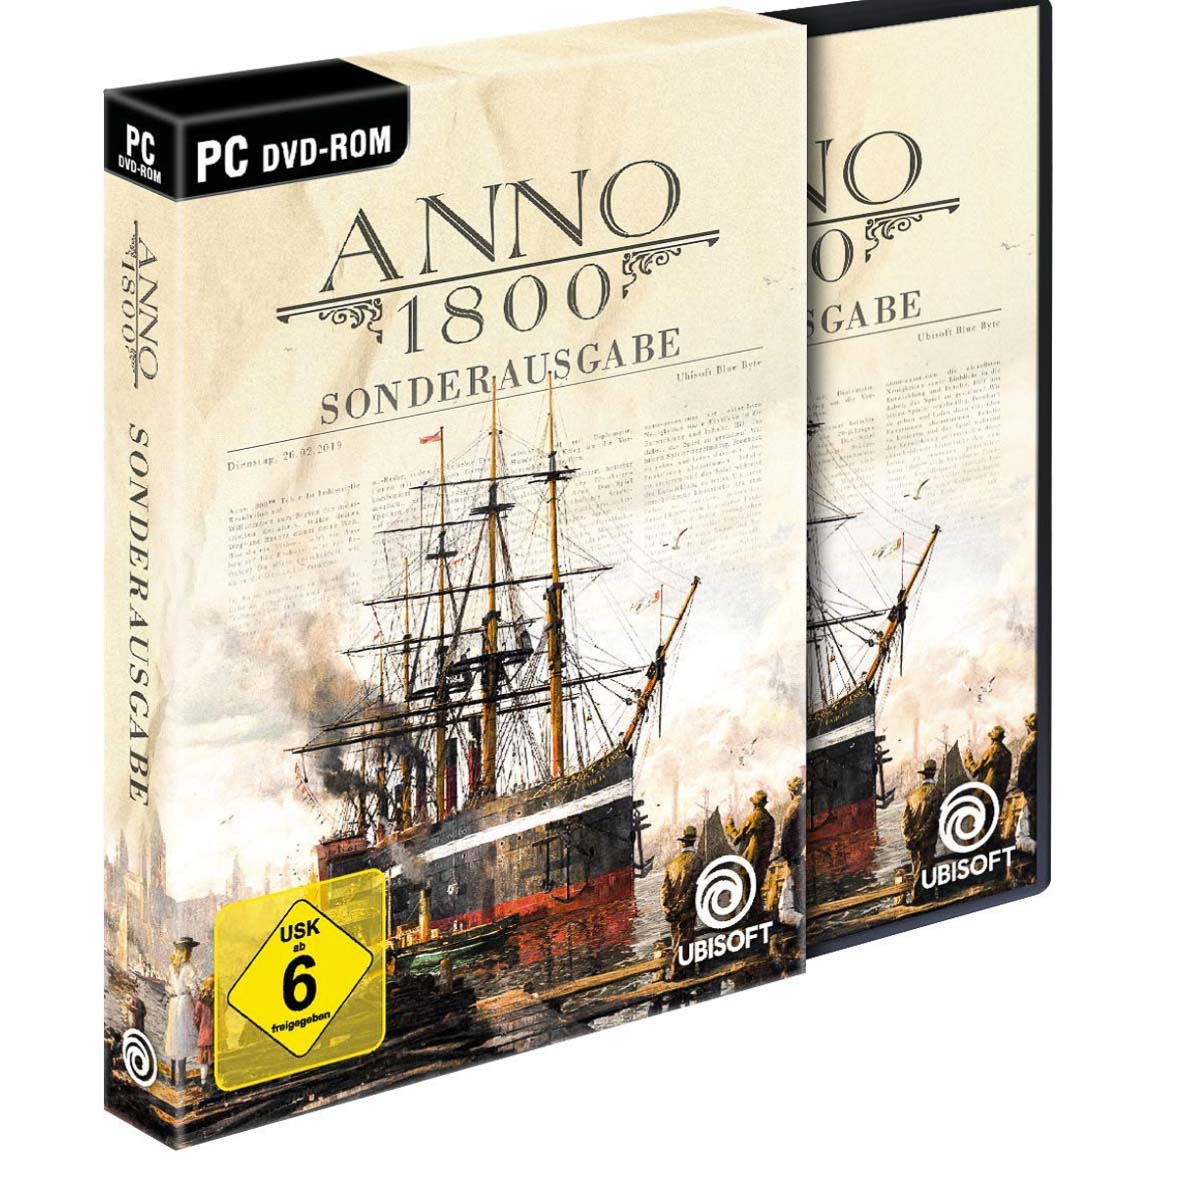 Featured image for “Anno 1800 (Ubisoft)”